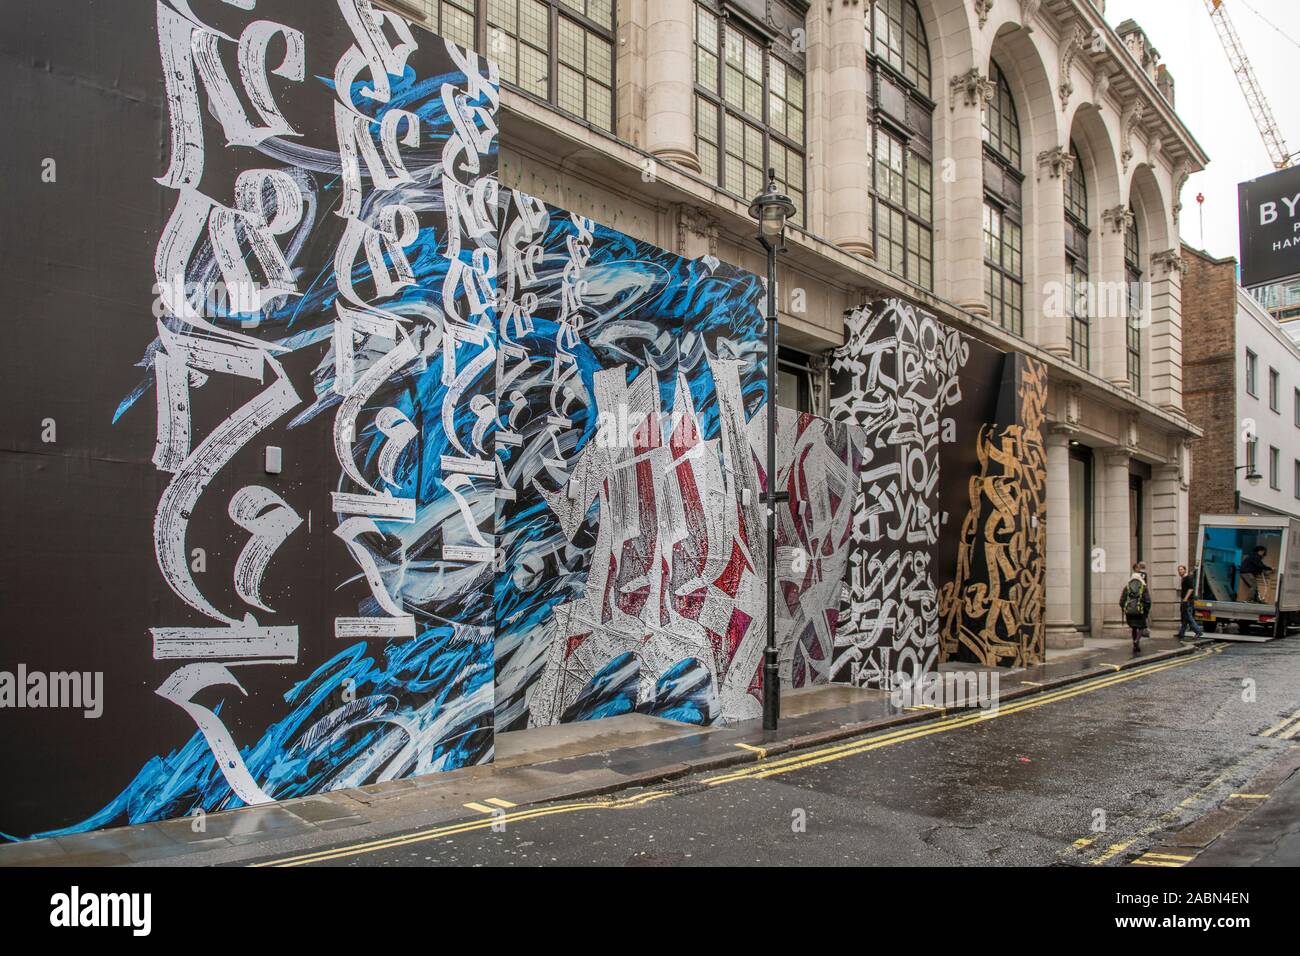 Dover Street Market, London, UK. 28th November 2019. EMBARGOED Online until 0001: 29/11/19, passed for Print Tomorrow. A monumental new 15th anniversary exterior mural created by renowned Russian calligraffiti artist Pokras Lampas in collaboration with iconic Japanese fashion label Comme Des Garcons (in collaboration with Opera Gallery London). One of the world’s most famous calligraphy artists, Pokras Lampas has created a unique fusion of graffiti and calligraphy called “calligraffiti.” Credit: Malcolm Park/Alamy Live News. Stock Photo